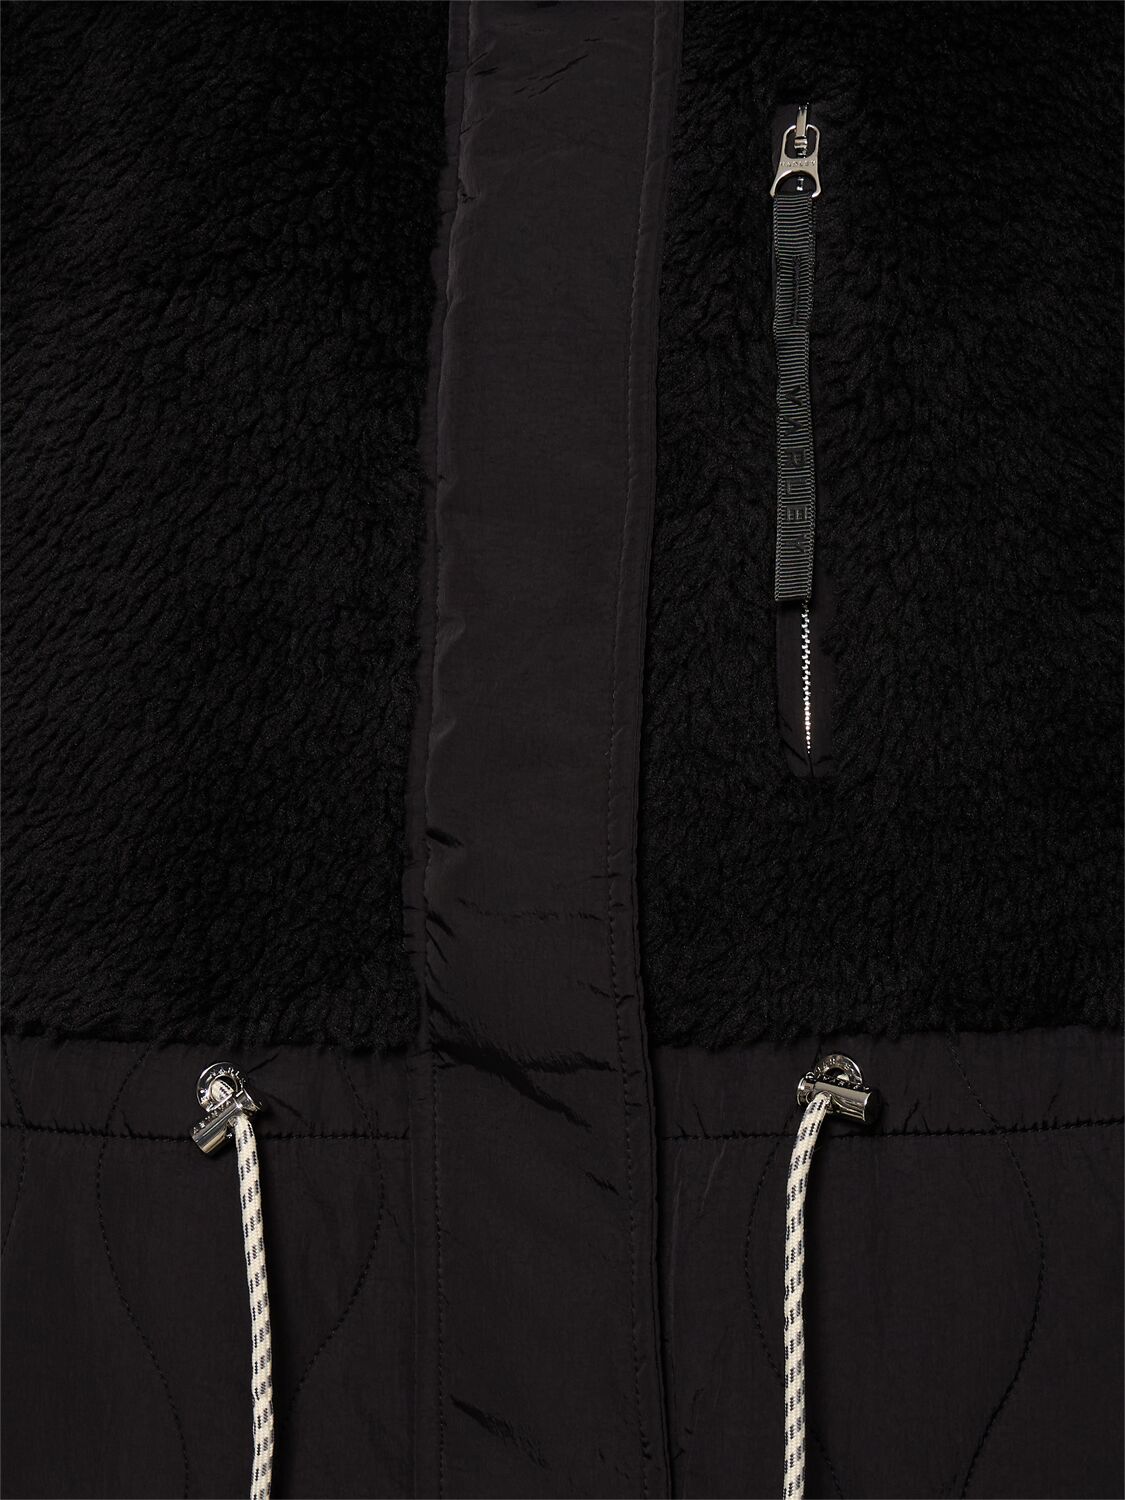 Shop Varley Walsh Quilted Sherpa Coat In Black